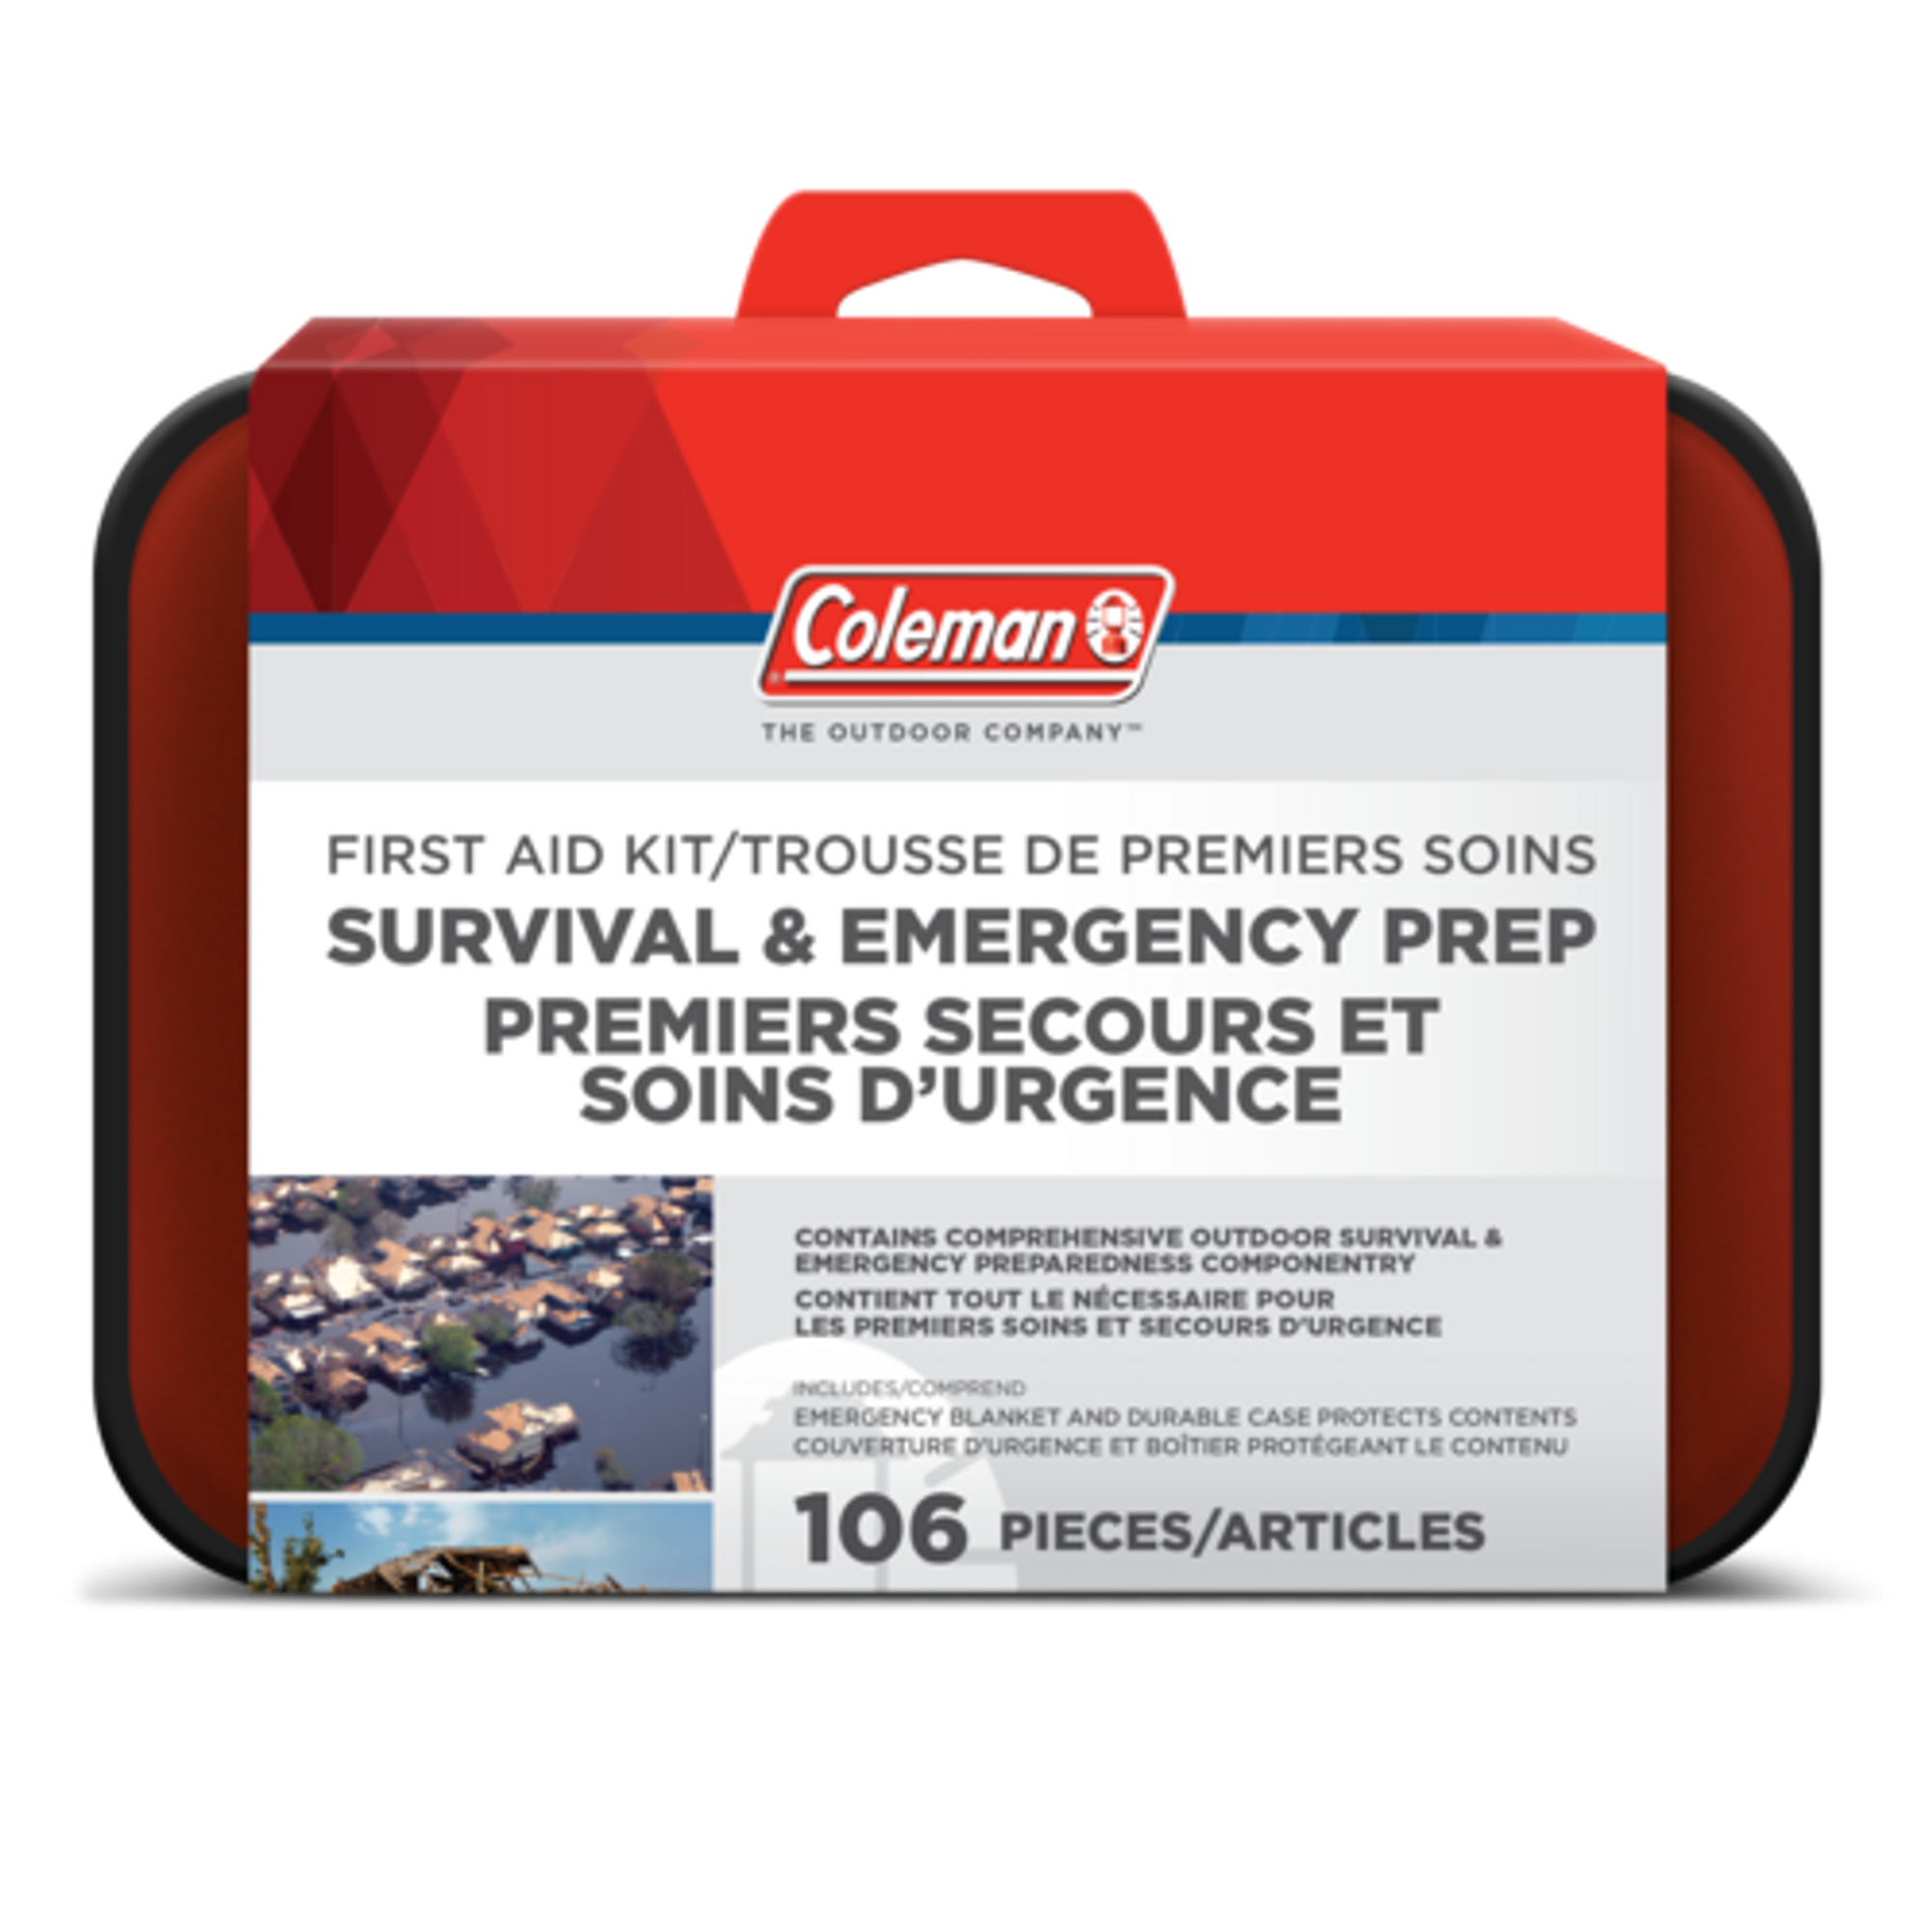 Survival & Emergency Prep First Aid Kit (128Pc)